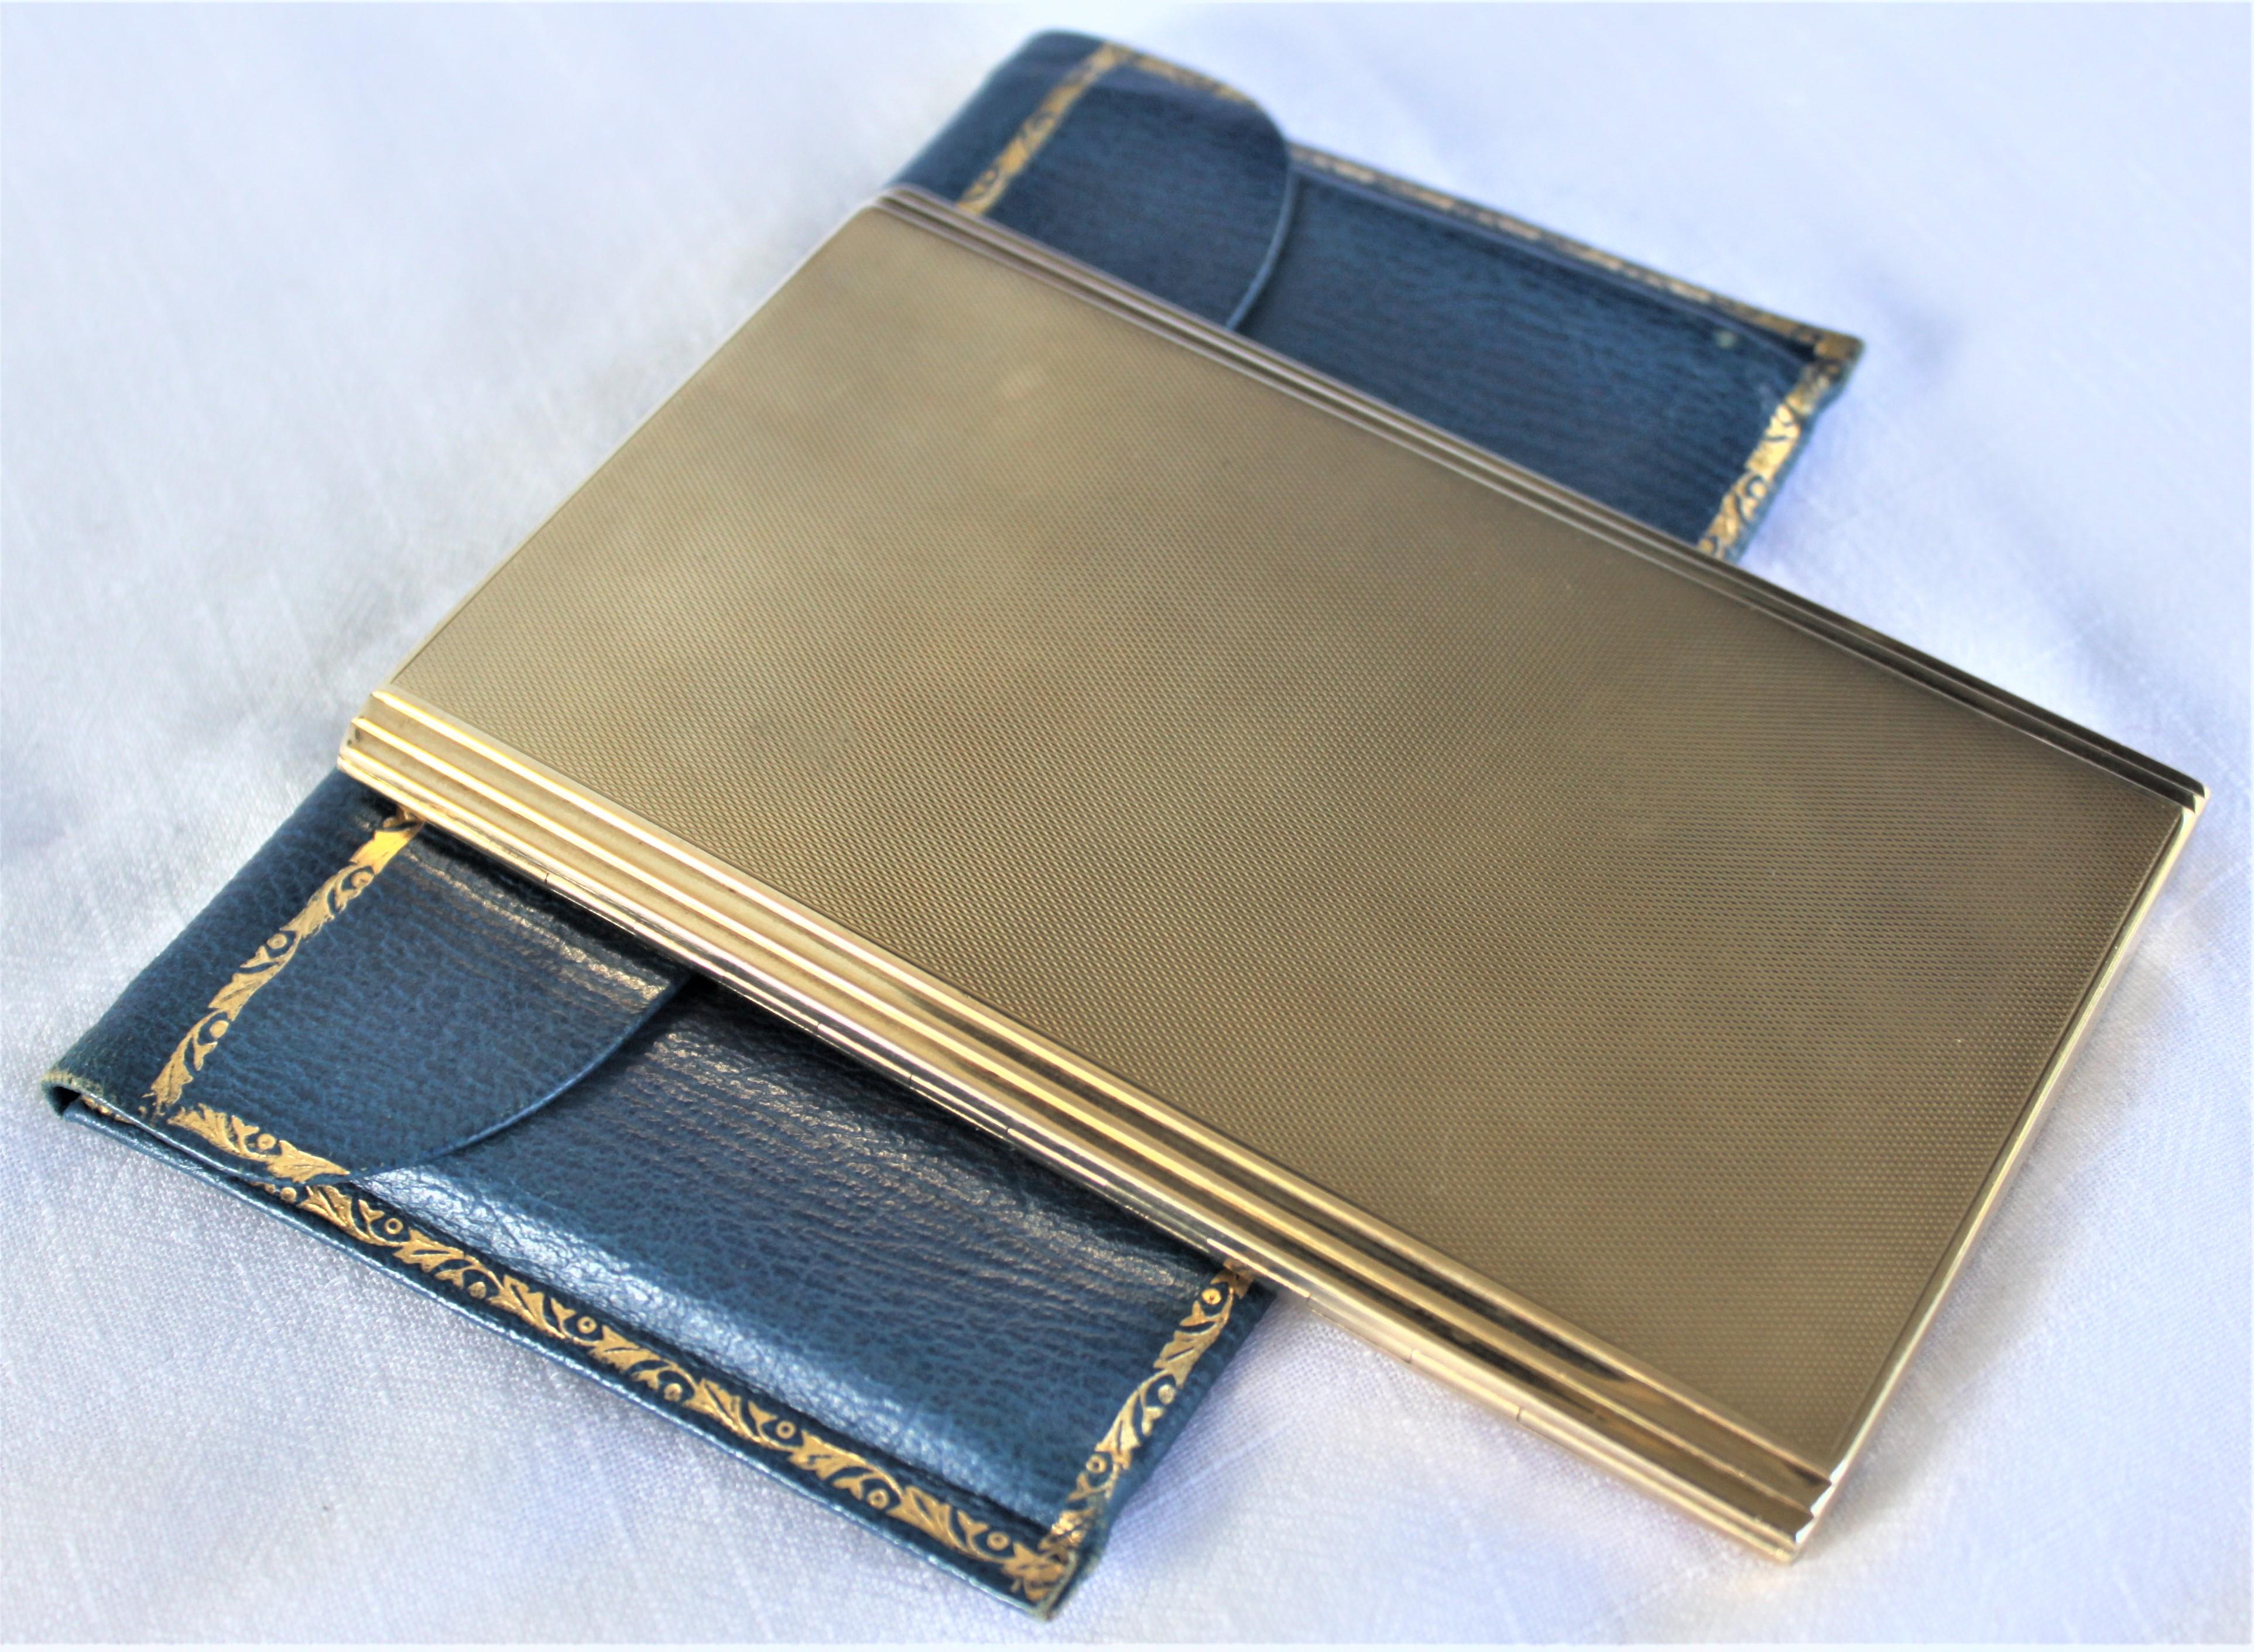 Birks Solid 9-Karat Yellow Gold Cigarette Case with Blue Outer Leather Envelope For Sale 7